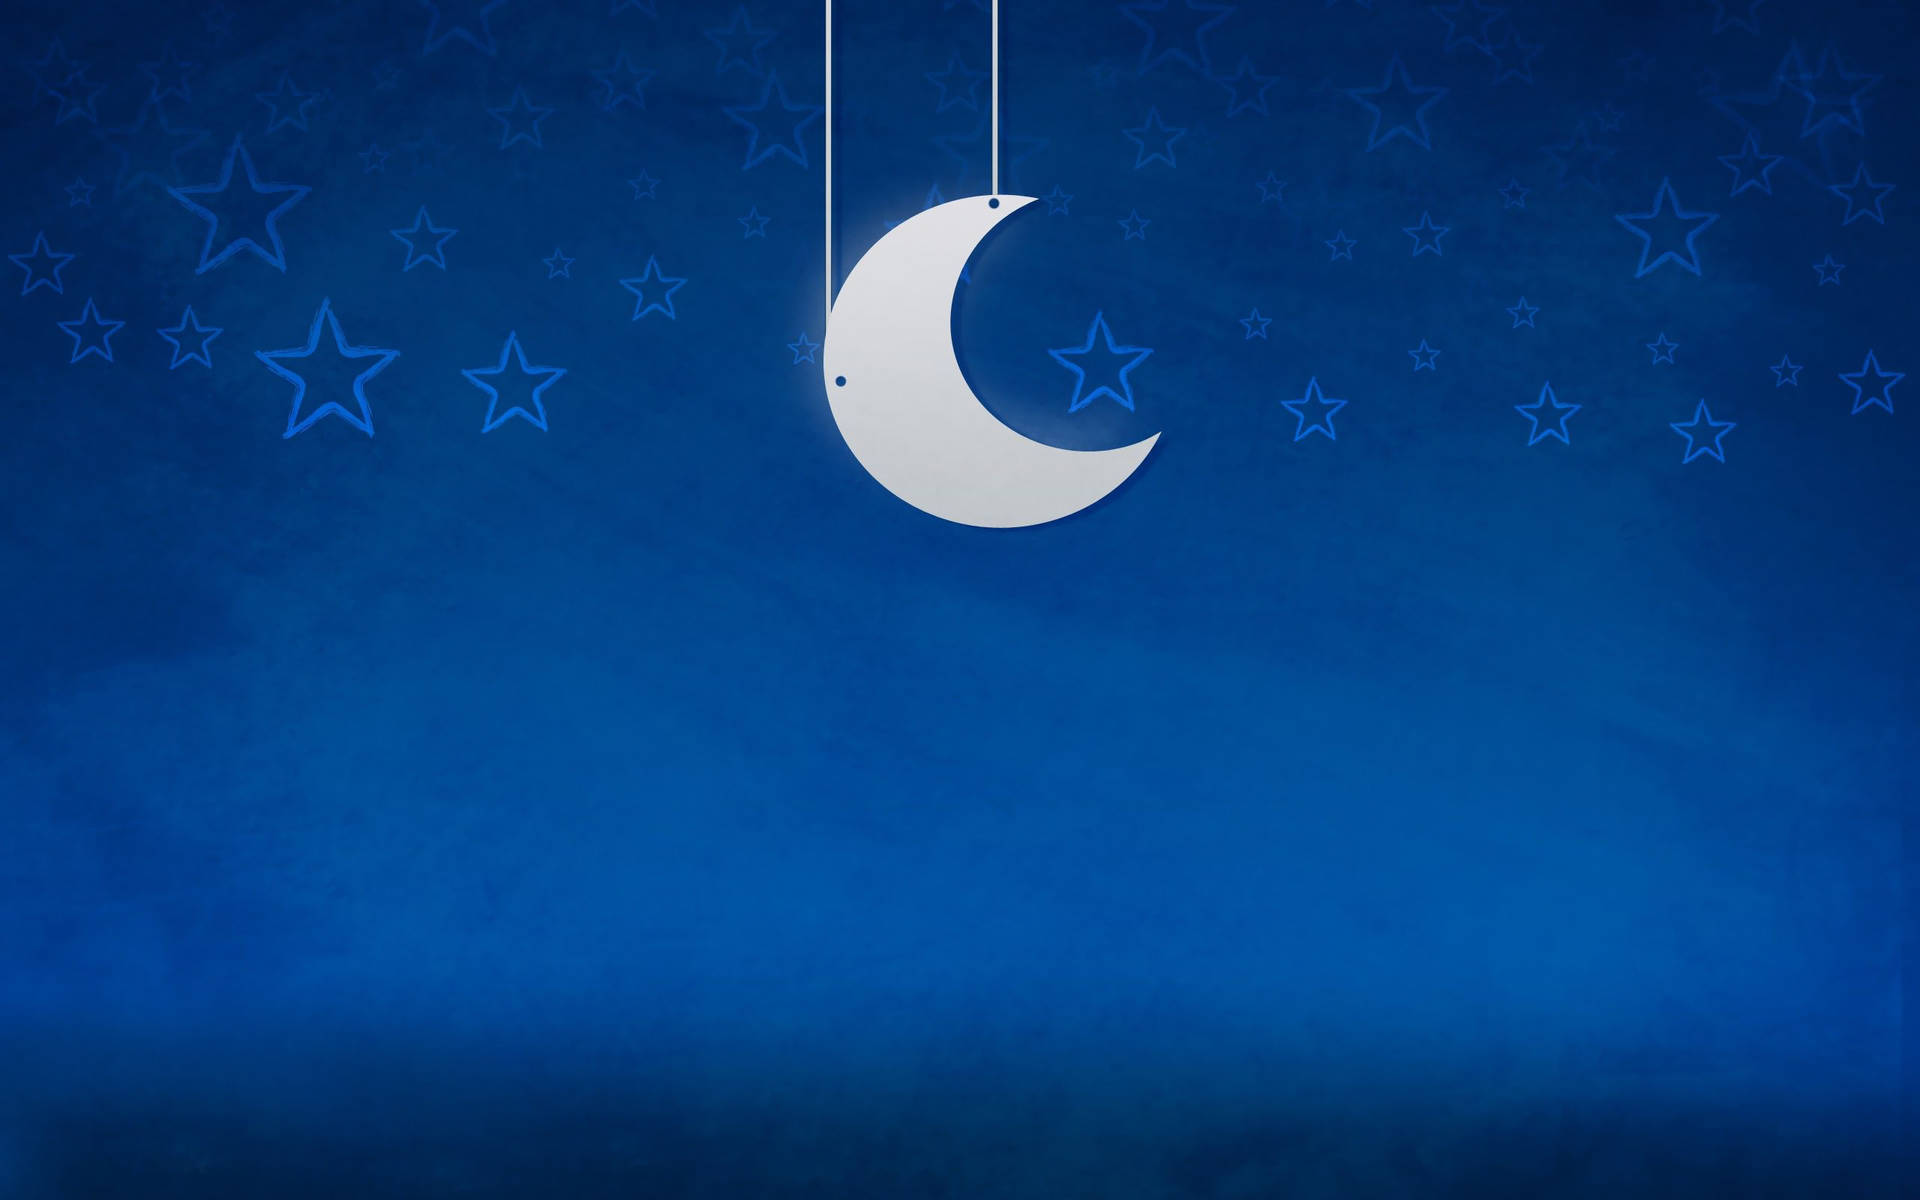 Blue Moon And Stars Background